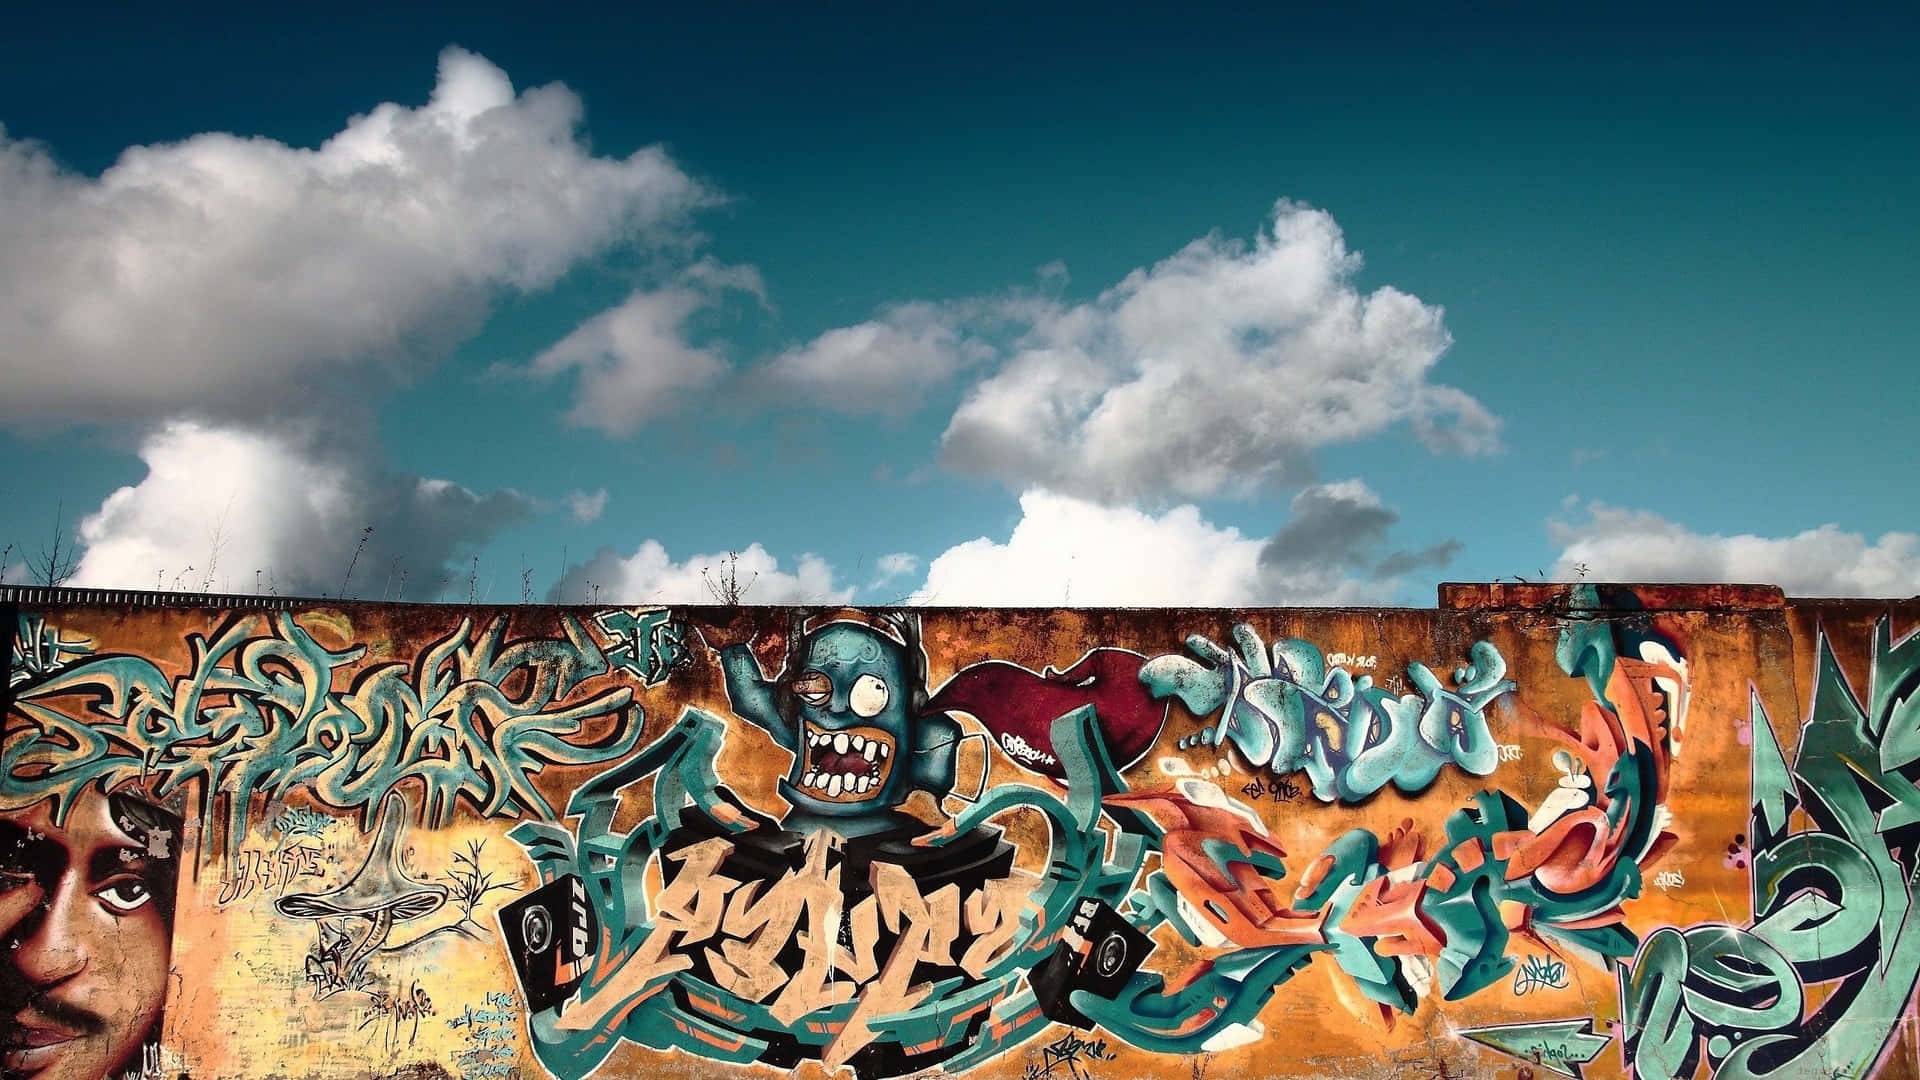 Colorful Graffiti Mural On Berlin Wall And Blue Skies Background